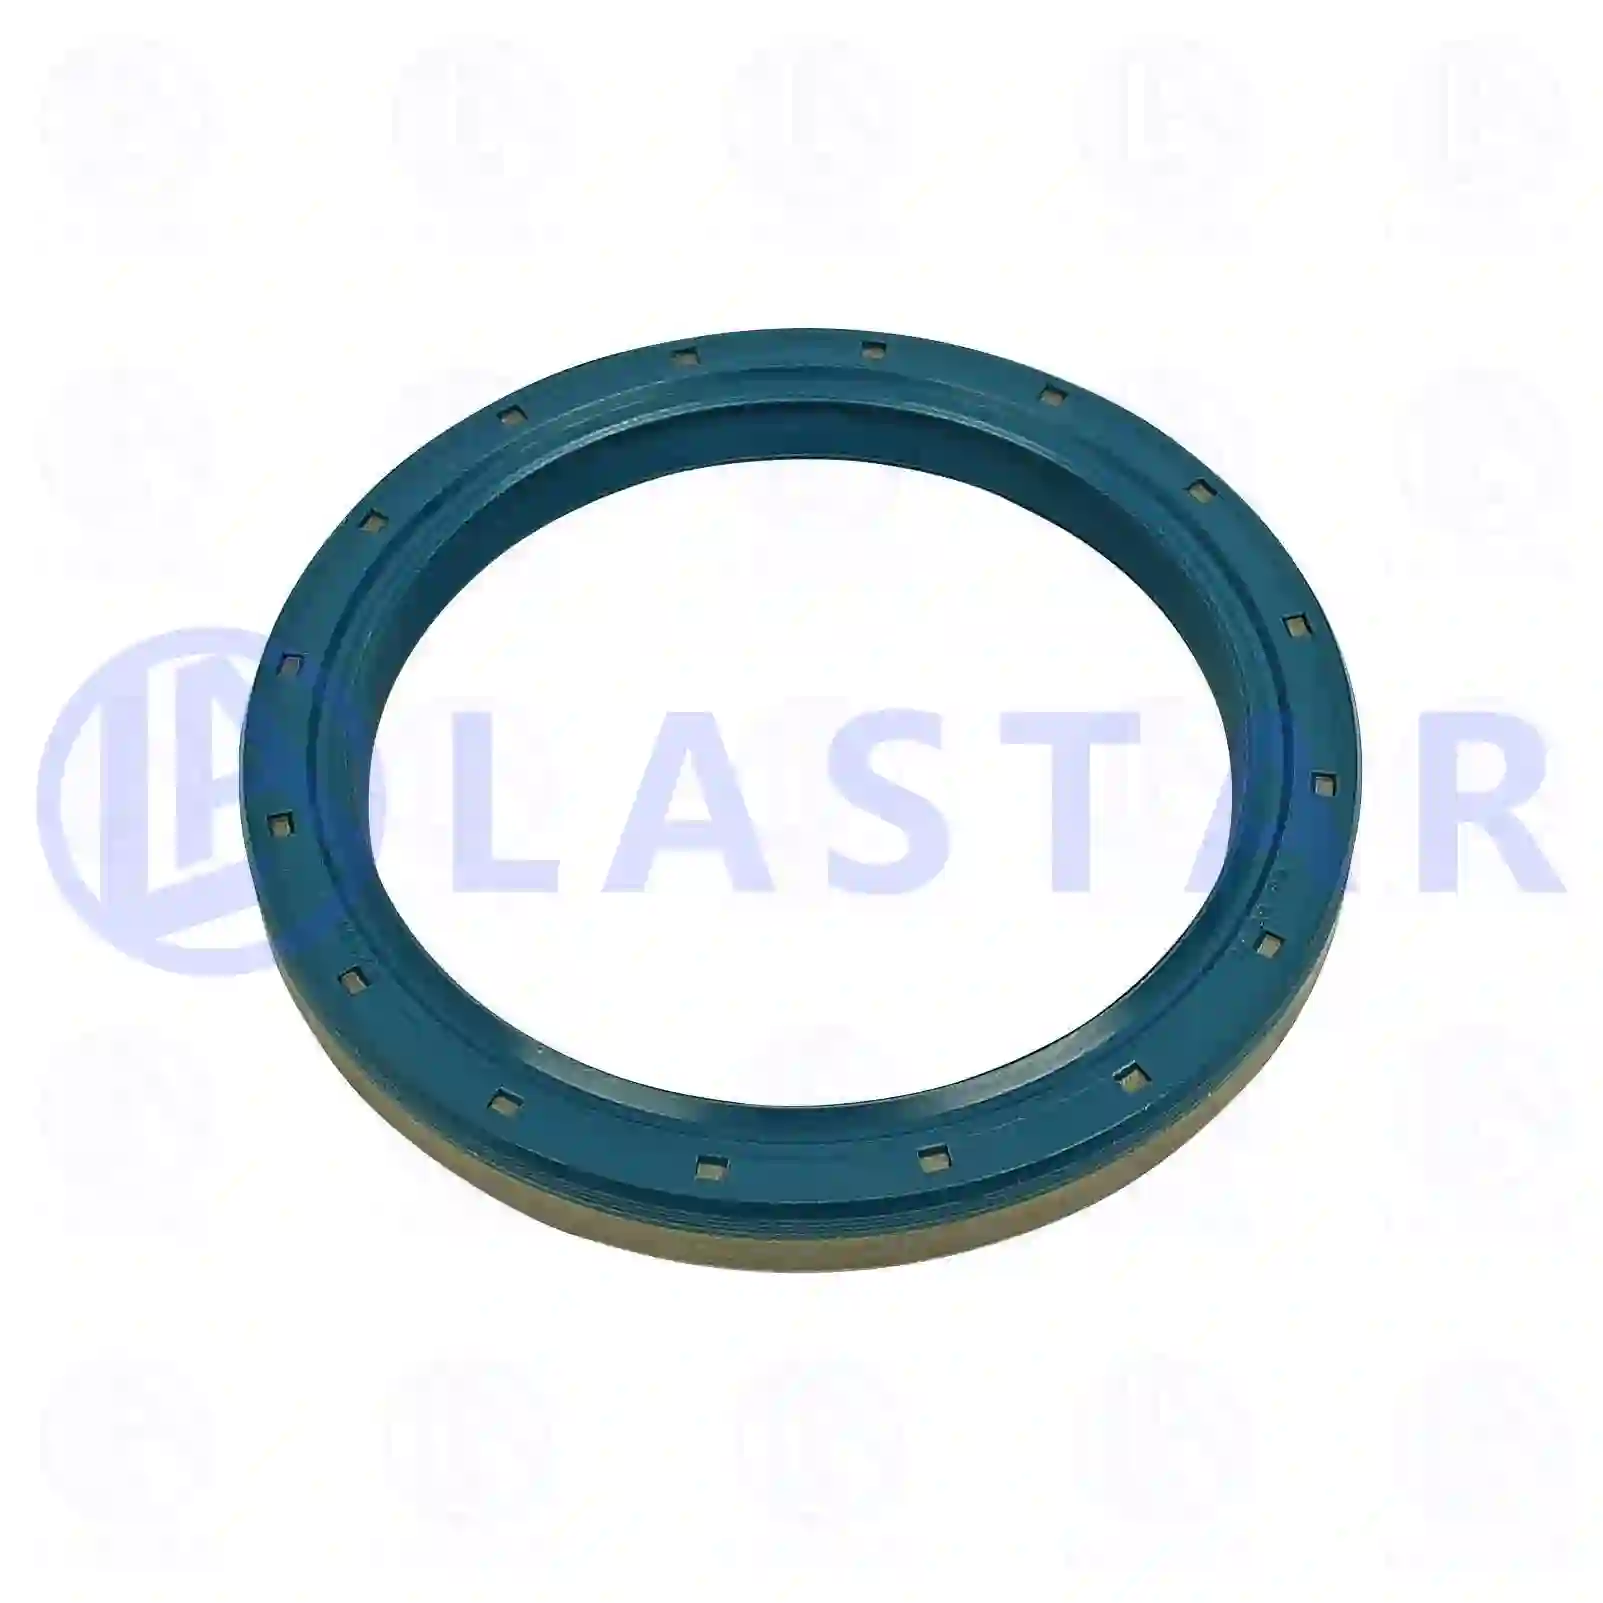 Oil seal, 77730570, 0059976647, 0059976847, 0059977747, 0169976647, 0169976747 ||  77730570 Lastar Spare Part | Truck Spare Parts, Auotomotive Spare Parts Oil seal, 77730570, 0059976647, 0059976847, 0059977747, 0169976647, 0169976747 ||  77730570 Lastar Spare Part | Truck Spare Parts, Auotomotive Spare Parts